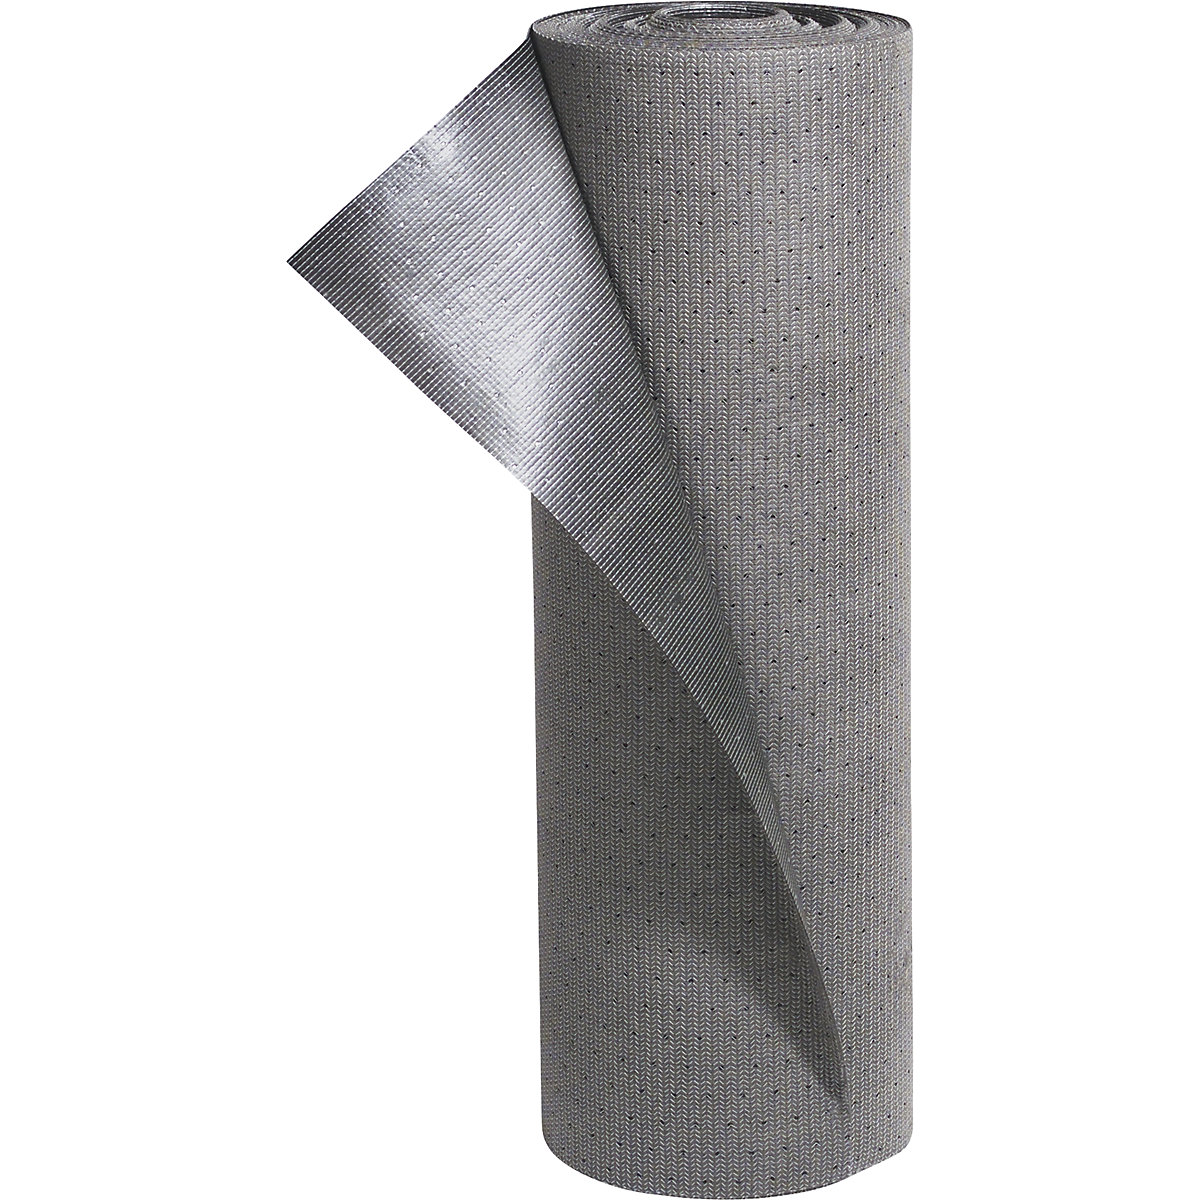 ELEPHANT universal absorbent sheeting roll – PIG